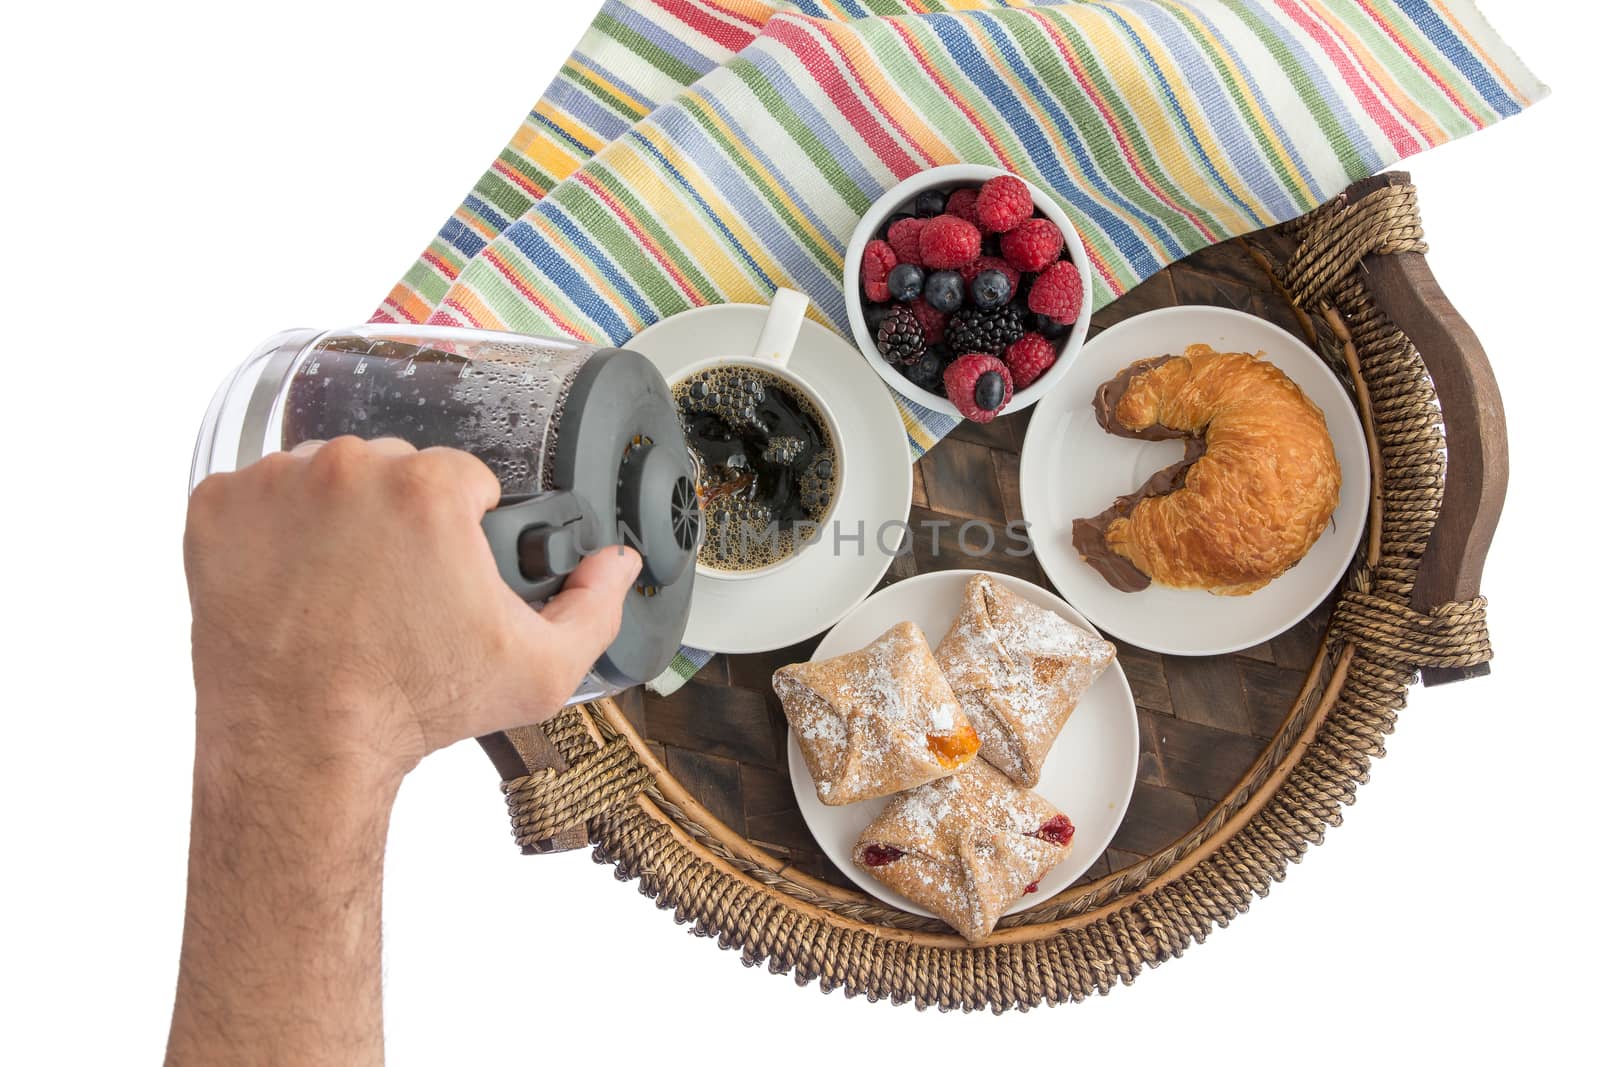 Man pouring fresh coffee for his breakfast from a glass jug into a cup on a wicker tray with assorted berries and pastries and a chocolate hazelnut croissant, overhead on white